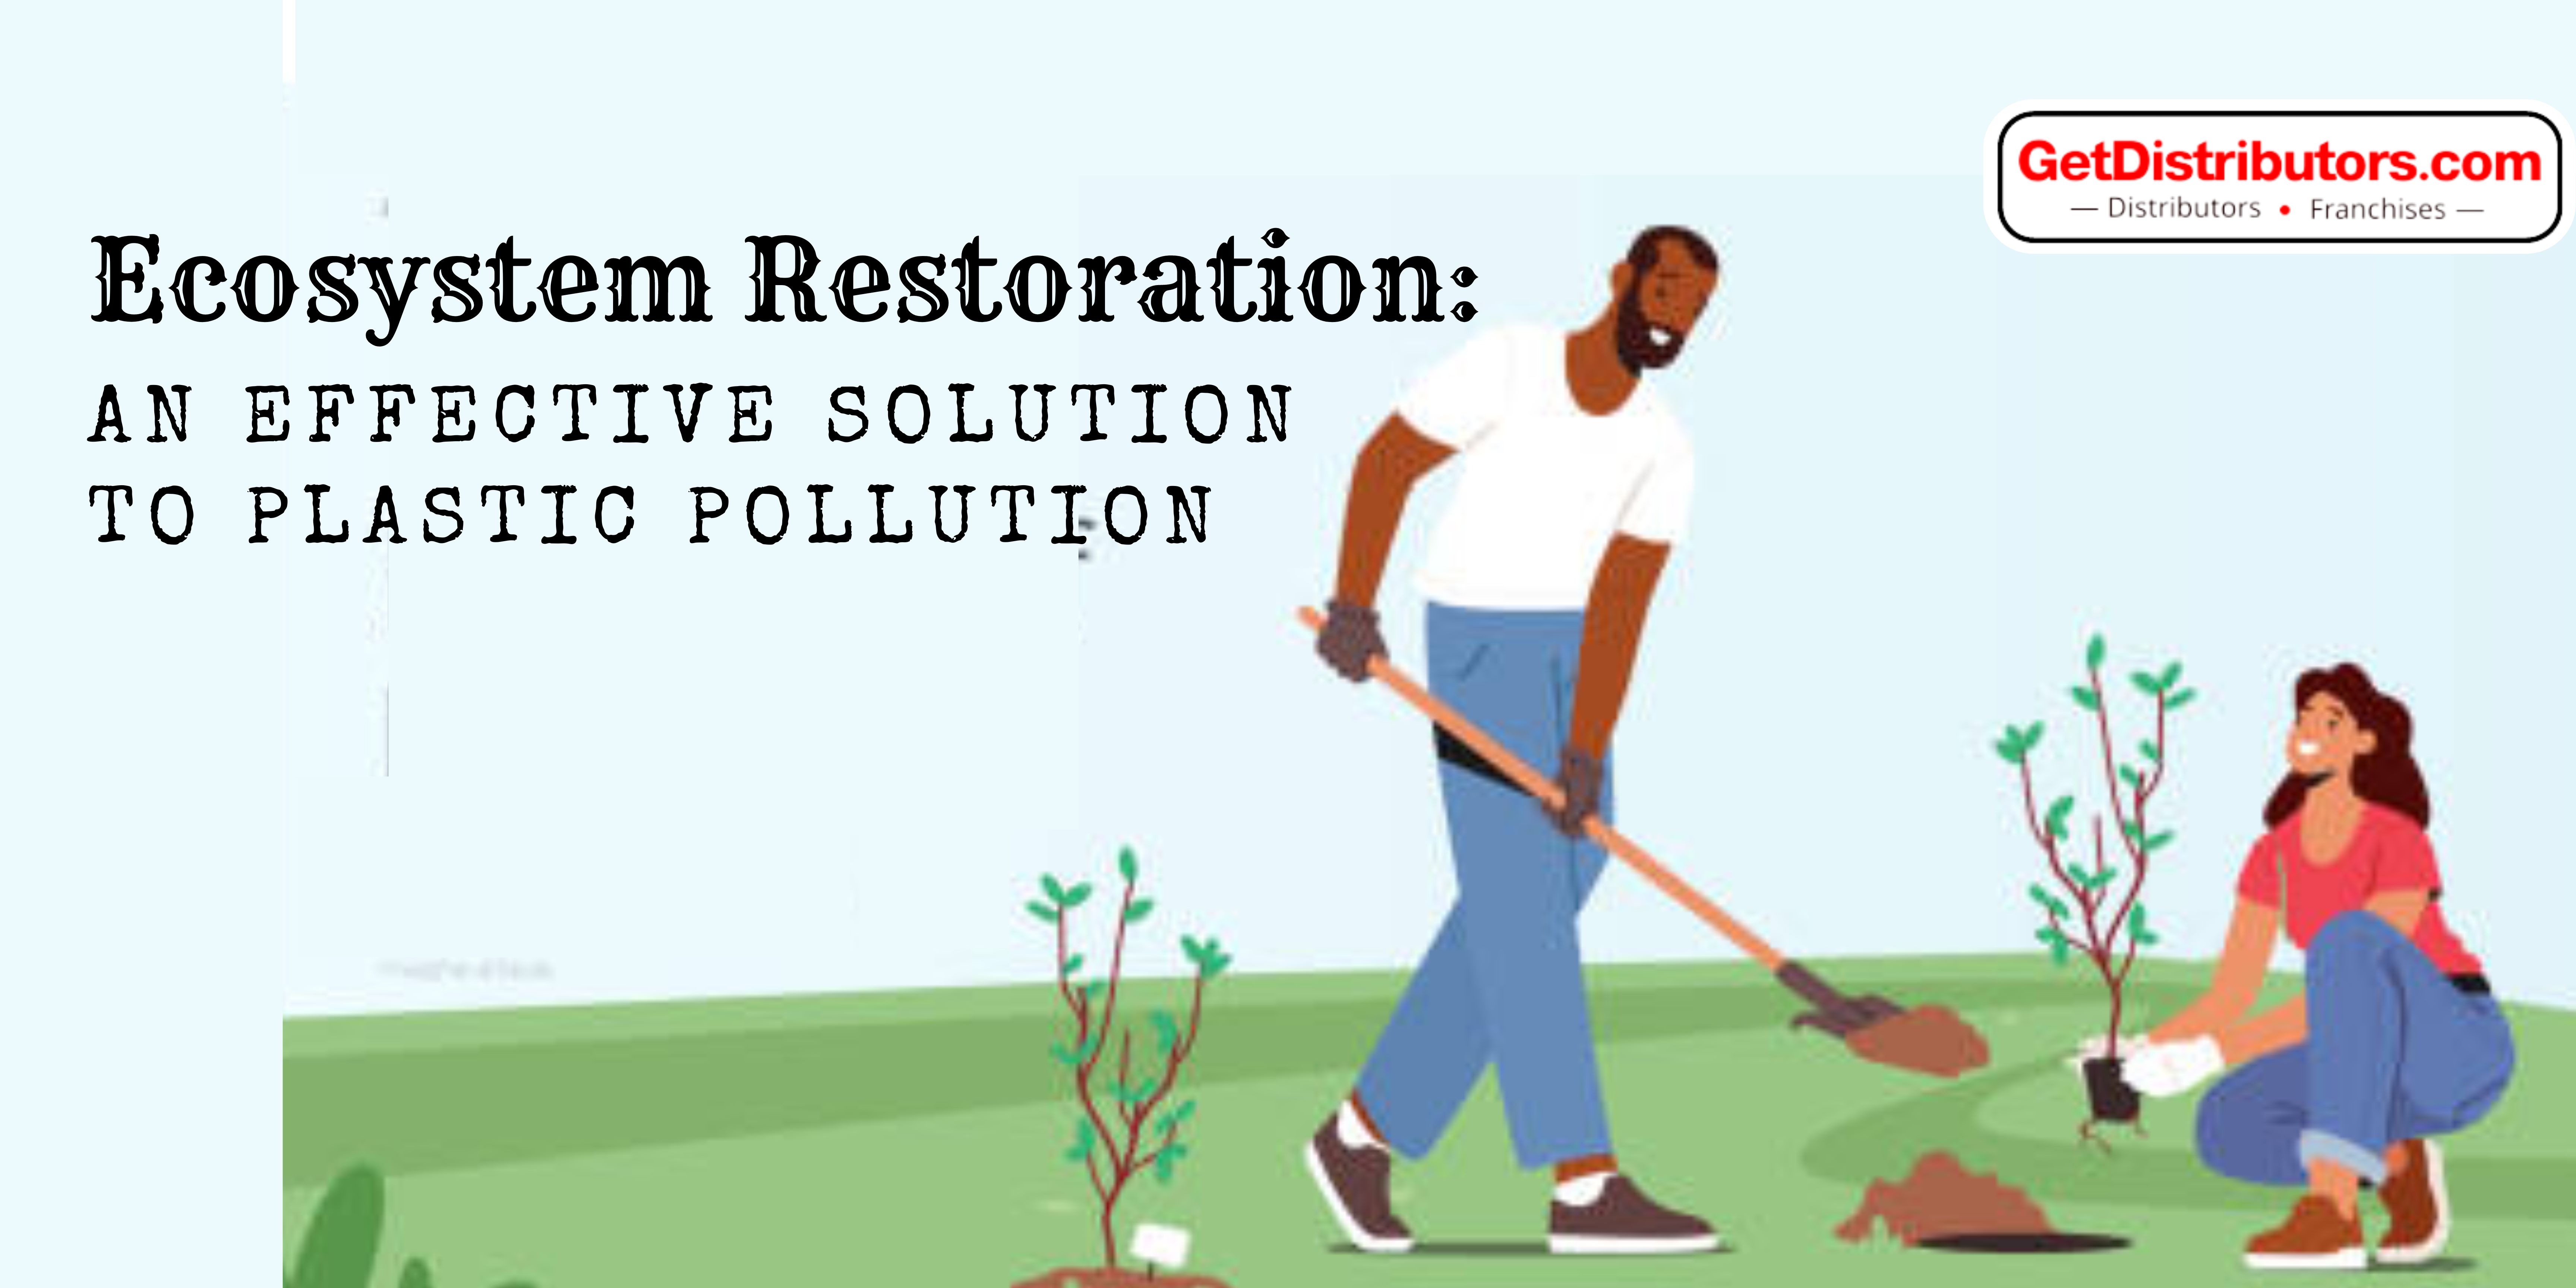 Ecosystem Restoration: An Effective Solution to Plastic Pollution